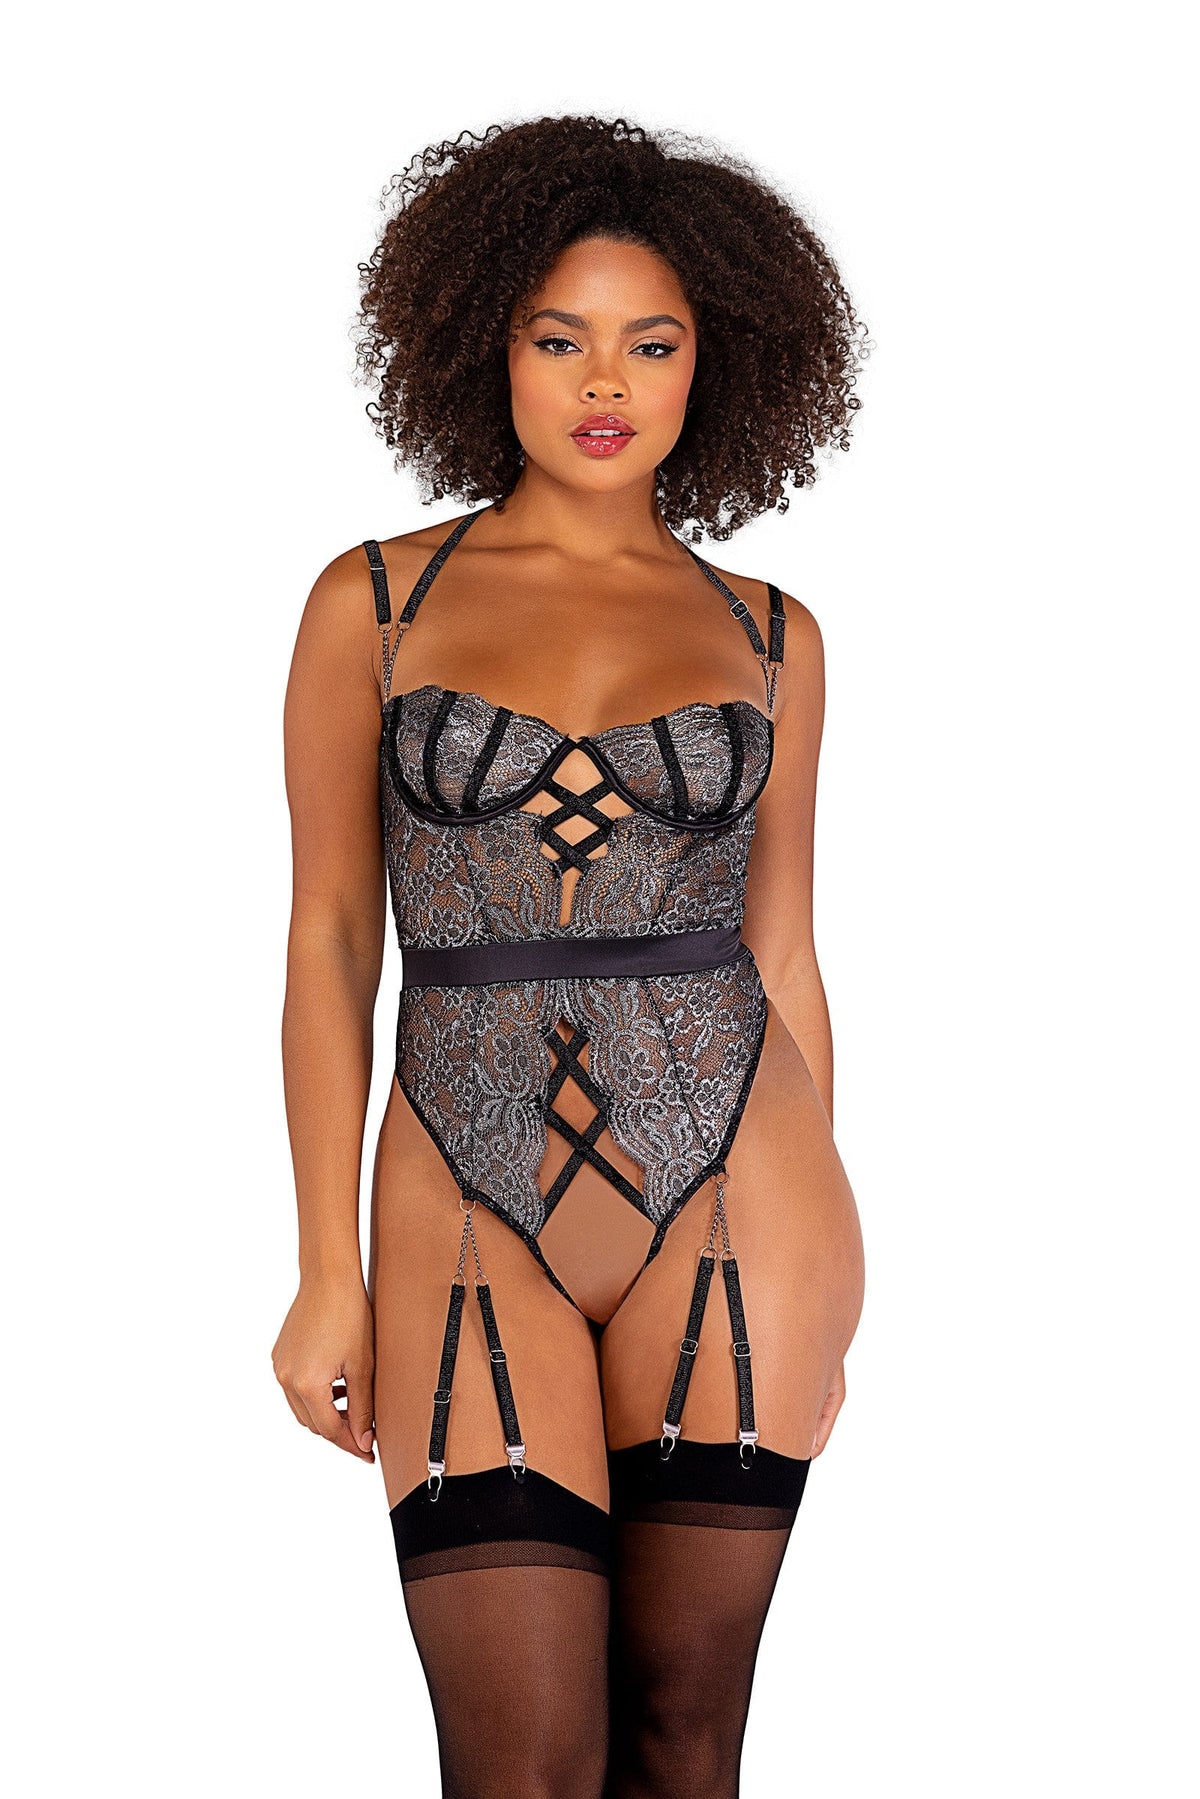 Roma Black Lace Strappy Sparkle Chained Garter Teddy Lingerie 2022 Black Lace Strappy Sparkle Chained Bustier Set Apparel &amp; Accessories &gt; Clothing &gt; One Pieces &gt; Jumpsuits &amp; Rompers